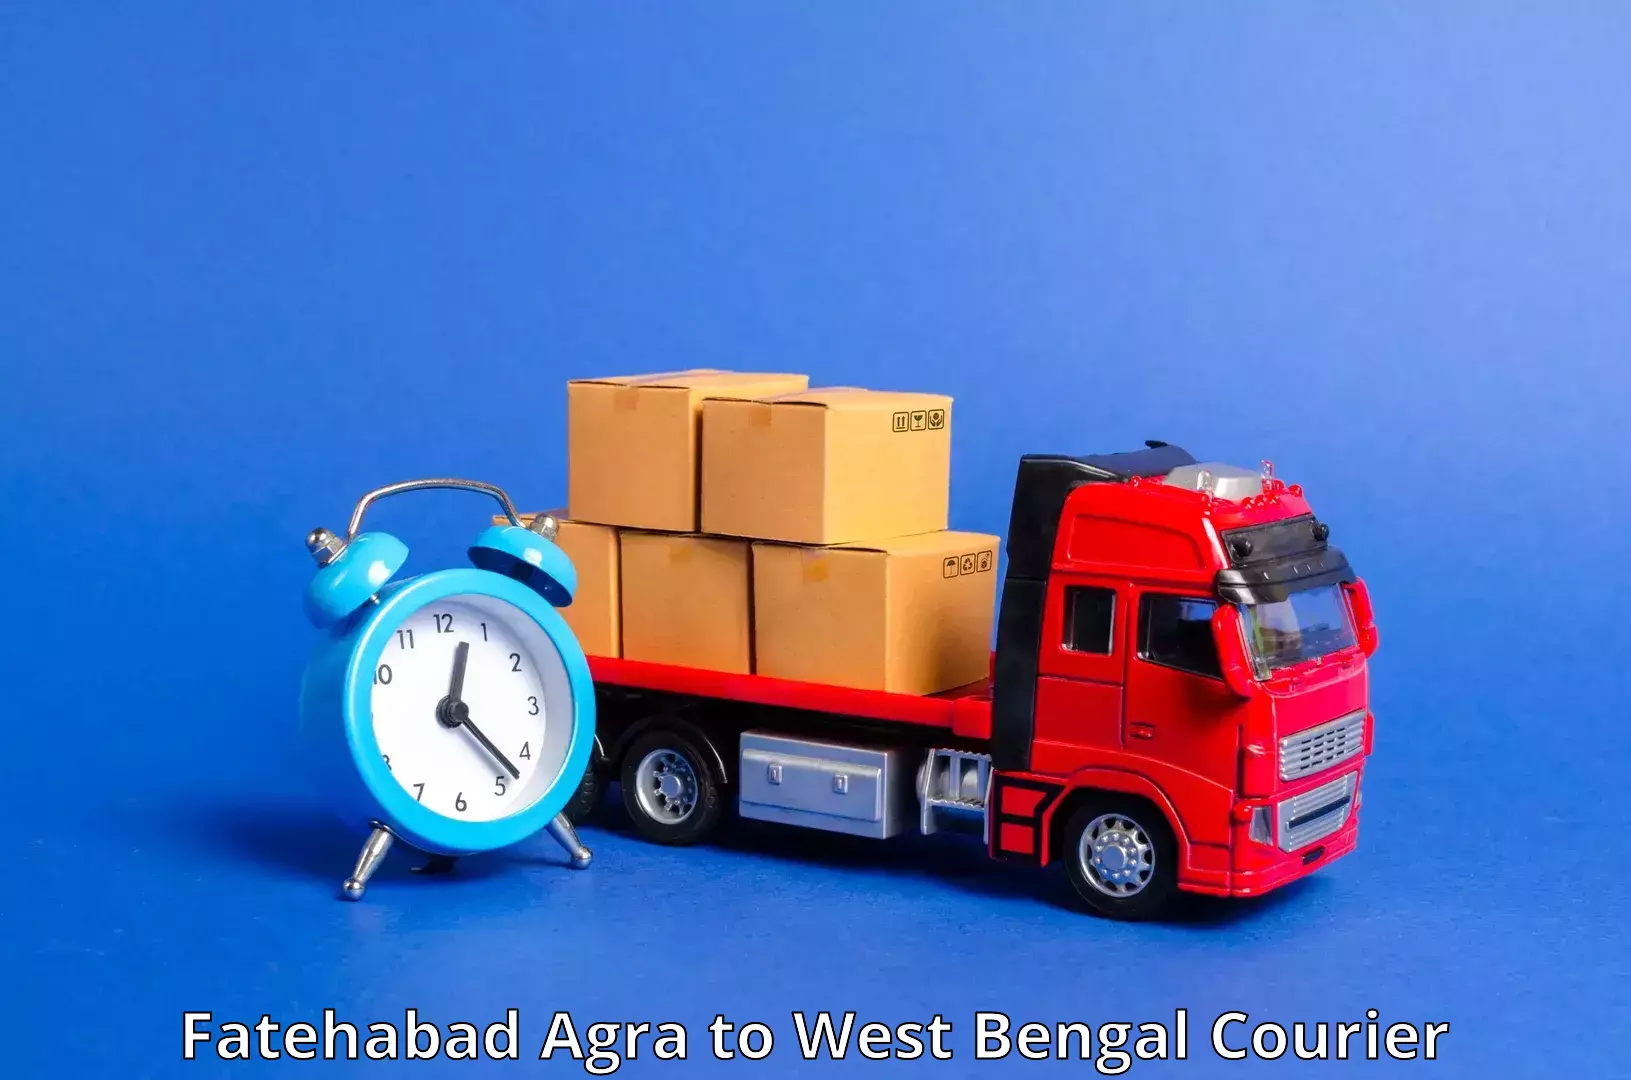 Tech-enabled shipping Fatehabad Agra to Bagdogra